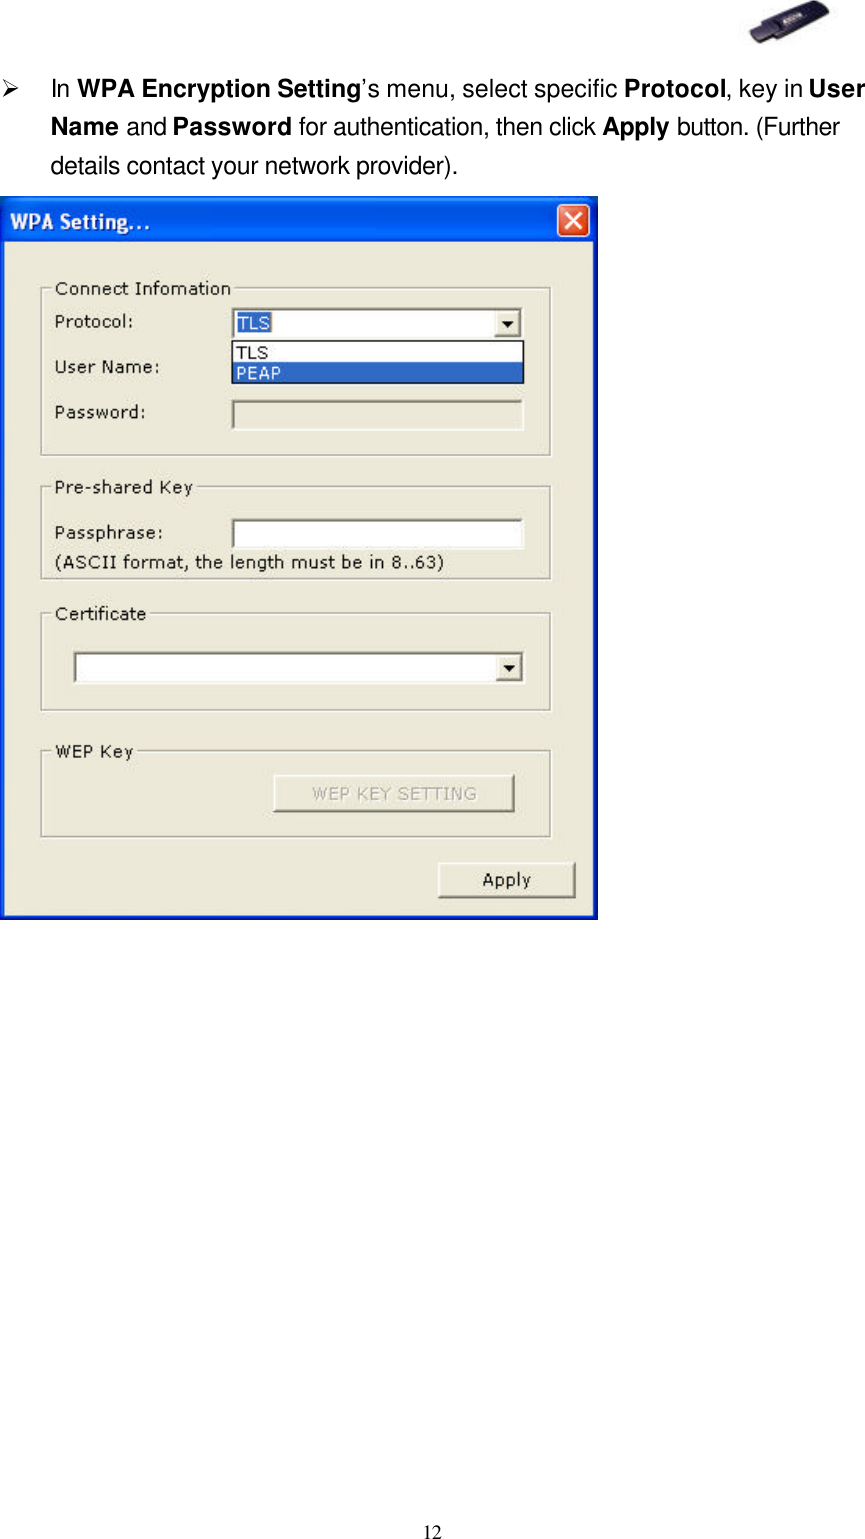   12 Ø In WPA Encryption Setting’s menu, select specific Protocol, key in User Name and Password for authentication, then click Apply button. (Further details contact your network provider).  